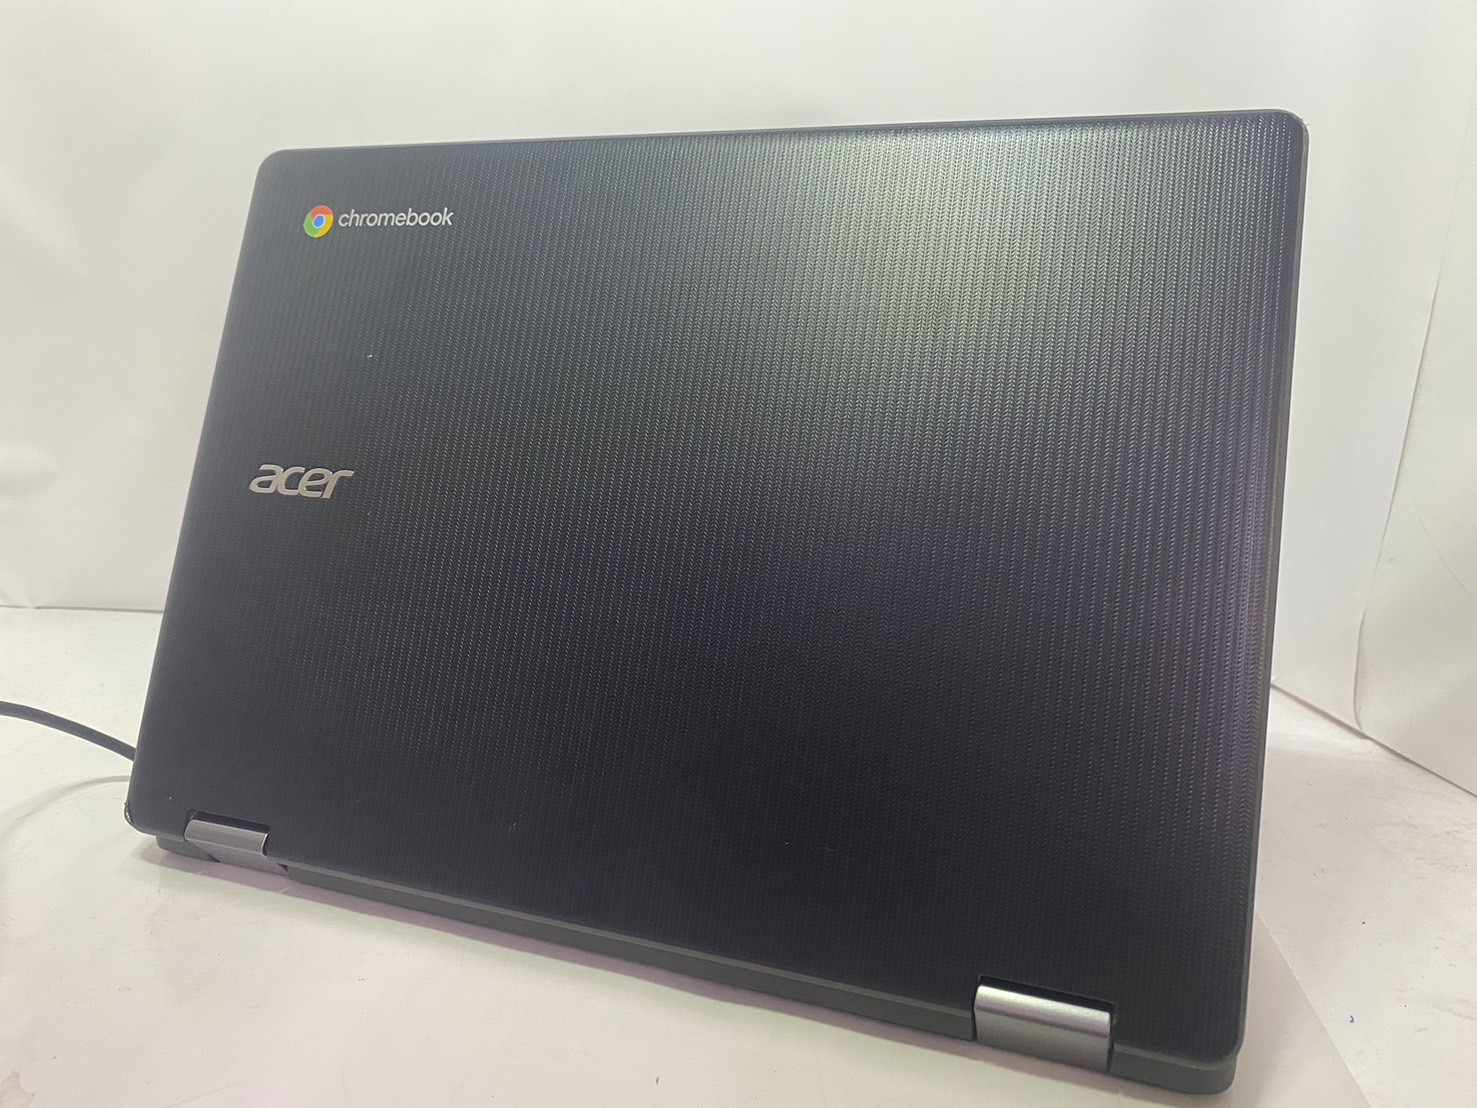 ACER(エイサー) Acer Chromebook Spin 511 R753T-A14Nの激安通販(詳細 ...